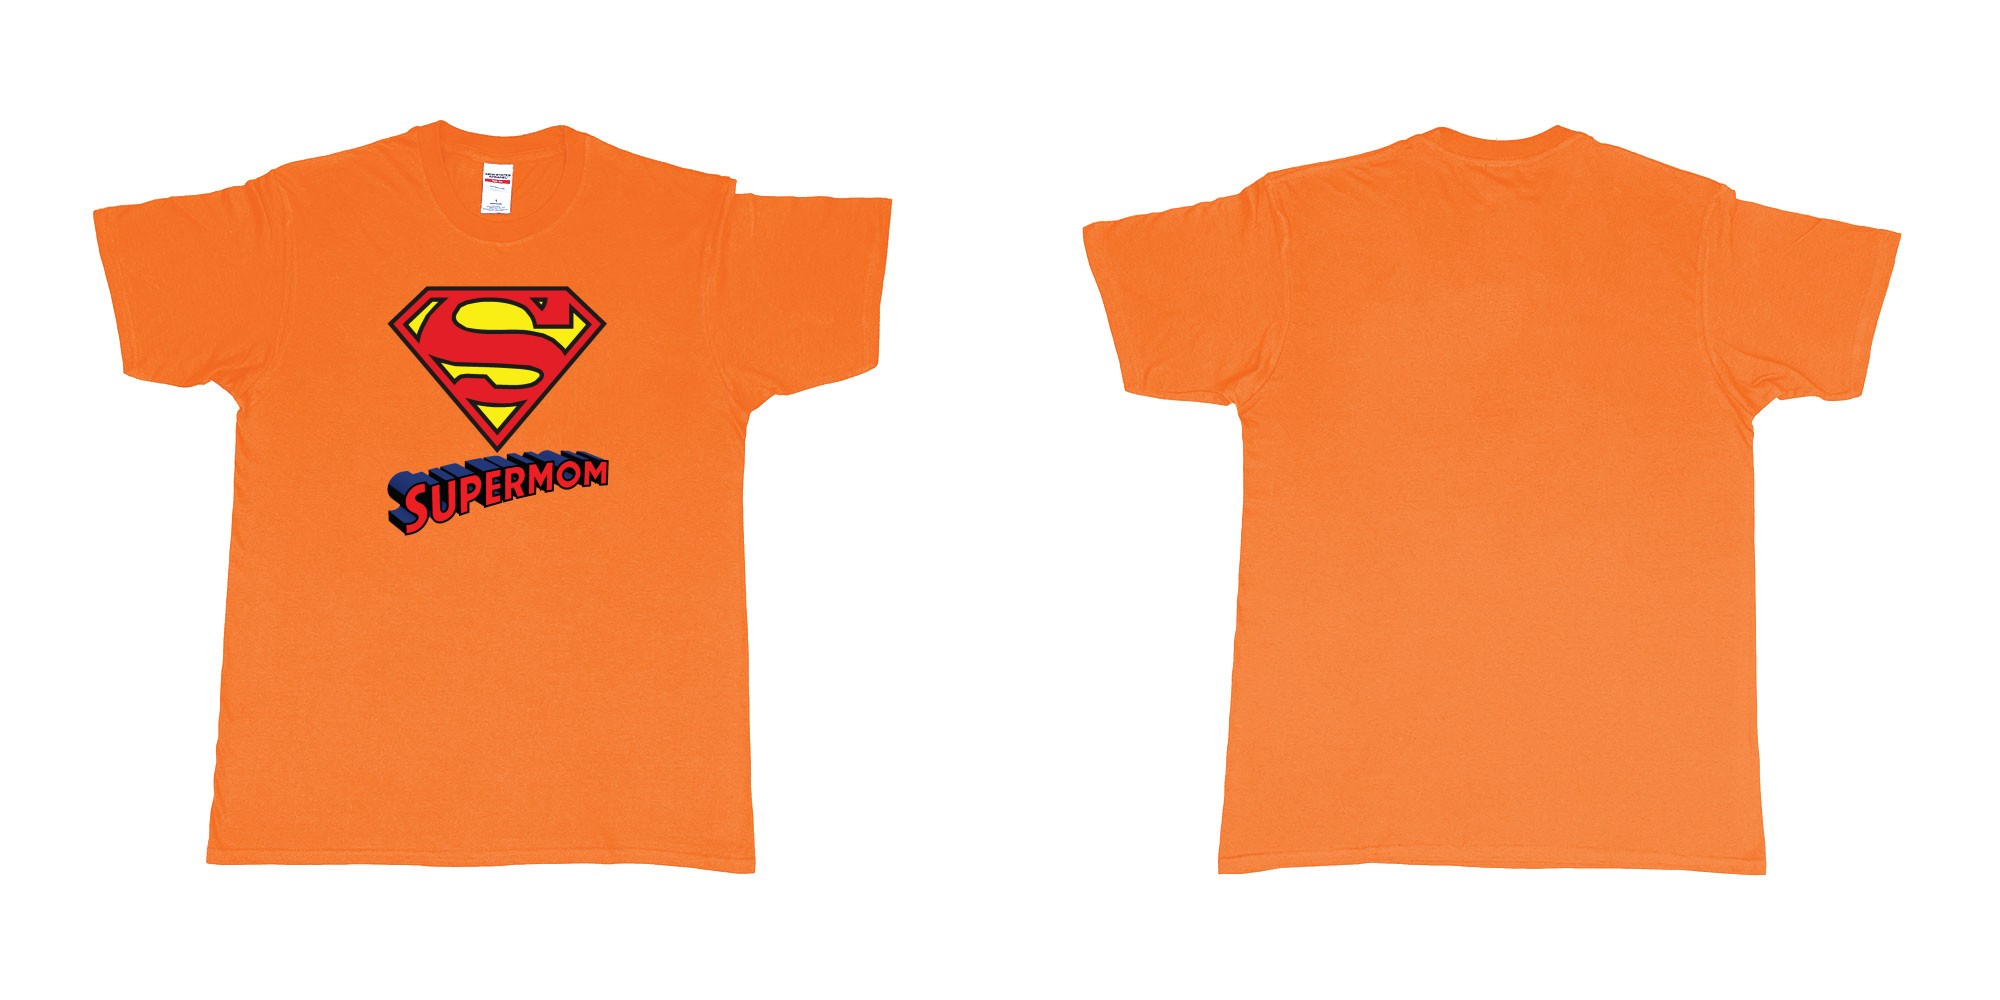 Custom tshirt design superman logo with own custom text print bali in fabric color orange choice your own text made in Bali by The Pirate Way